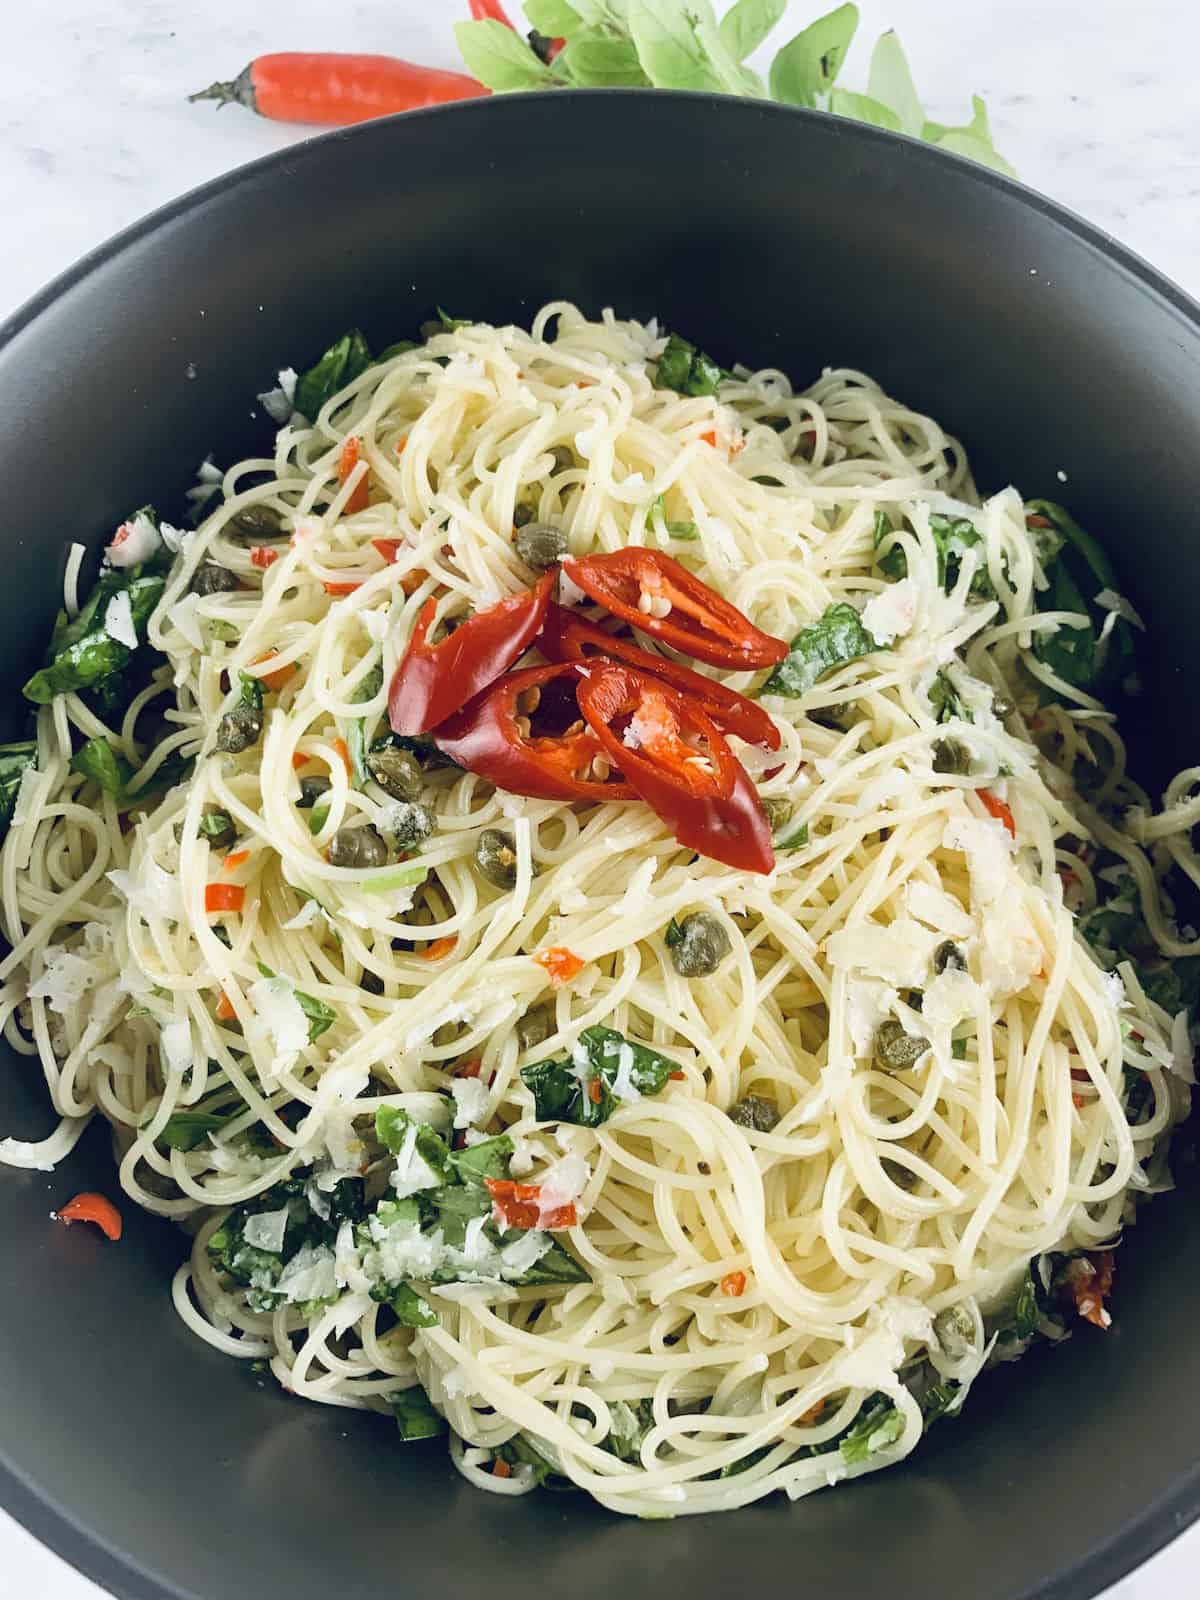 Lemon capellini salad in a black bowl with red. chillies and basil sprigs on the top.